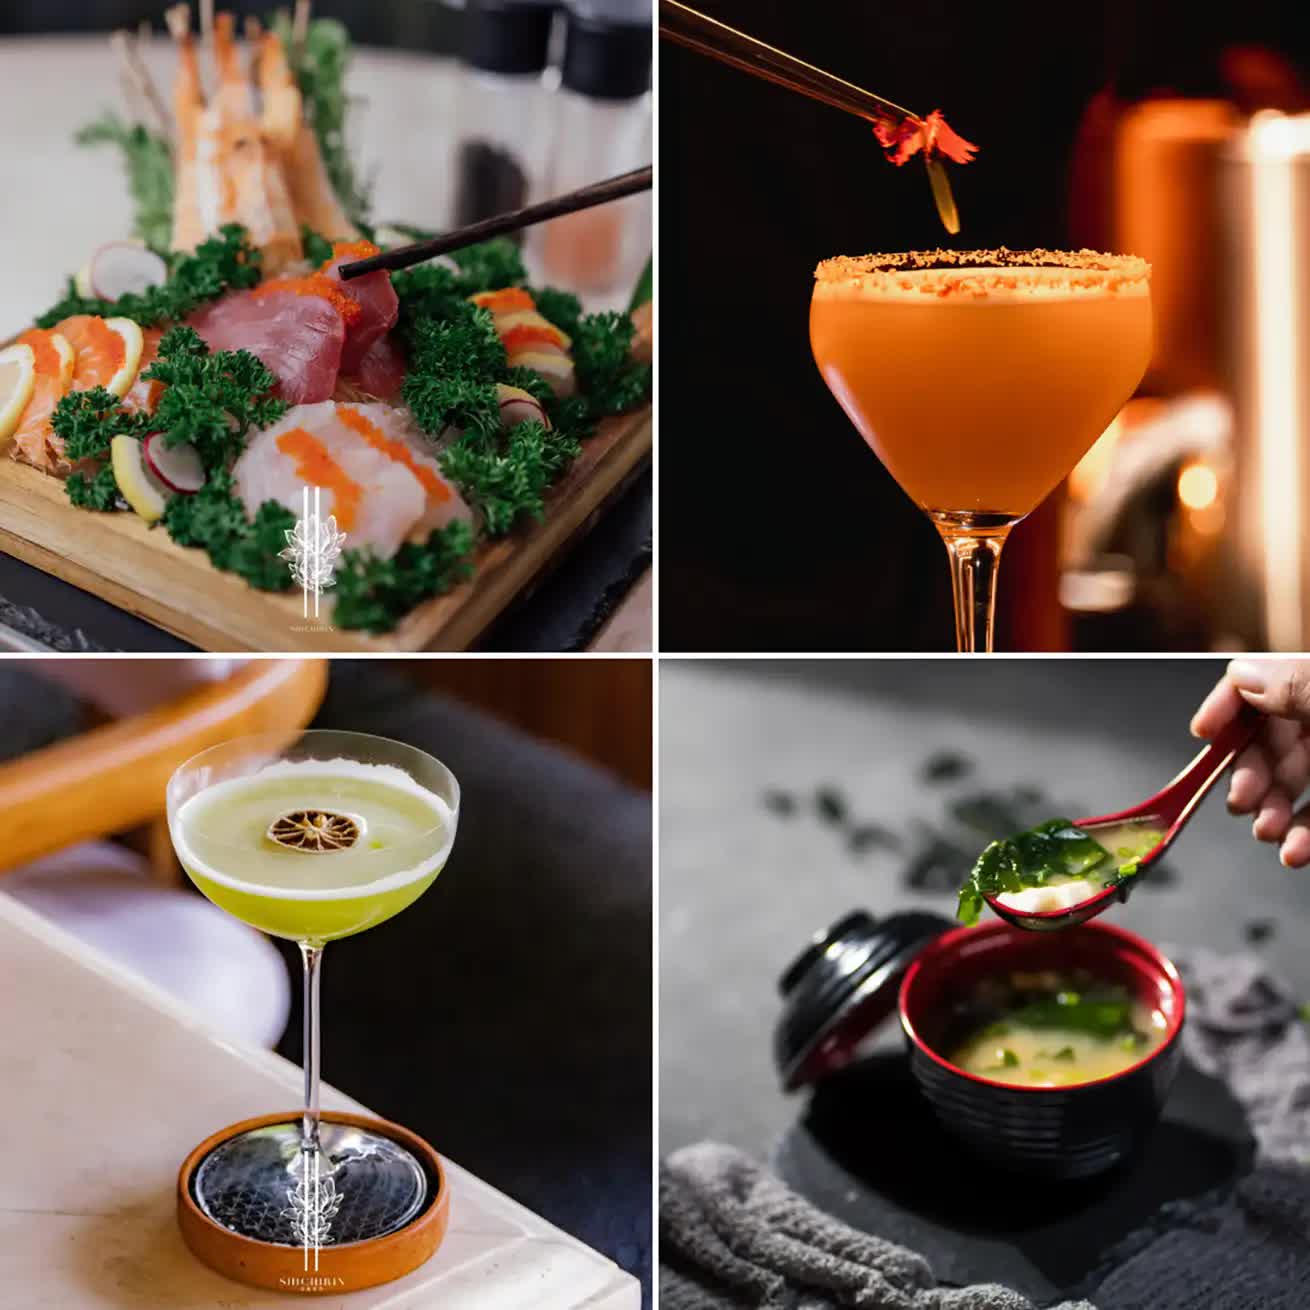 Exquisite seafood dishes and colorful cocktails at Shichirin restaurant